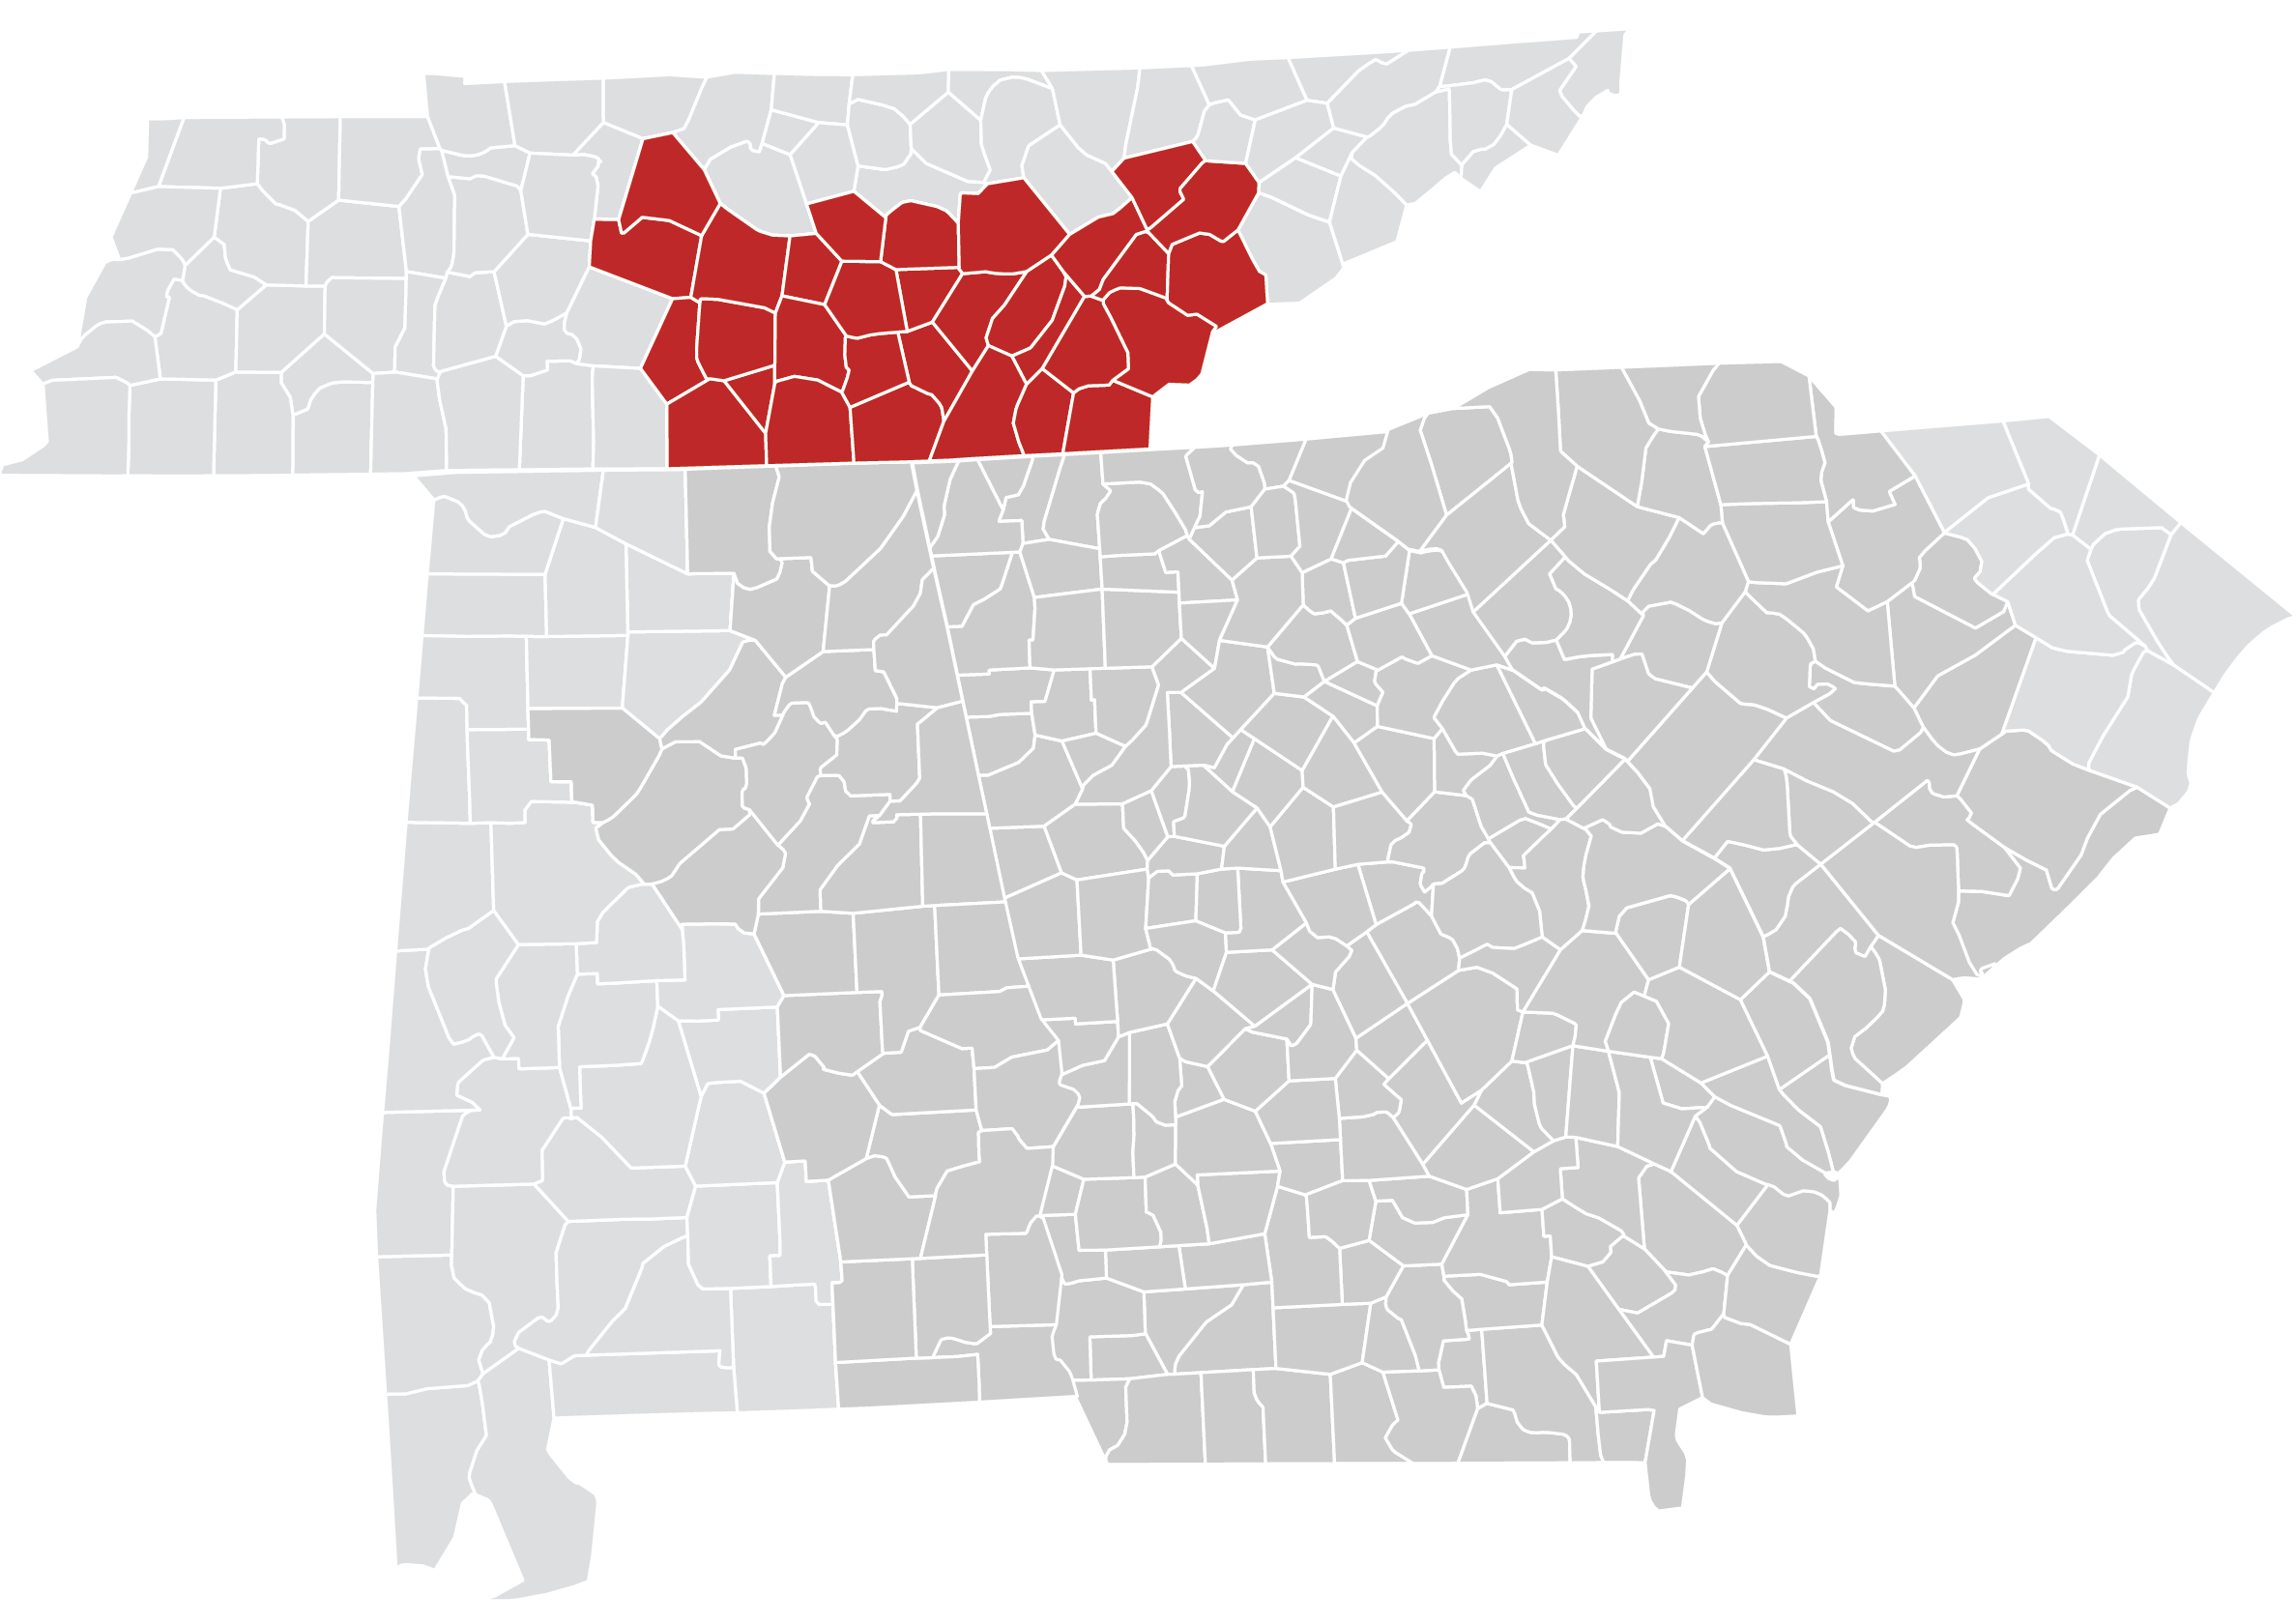 The counties we service in Tennessee.